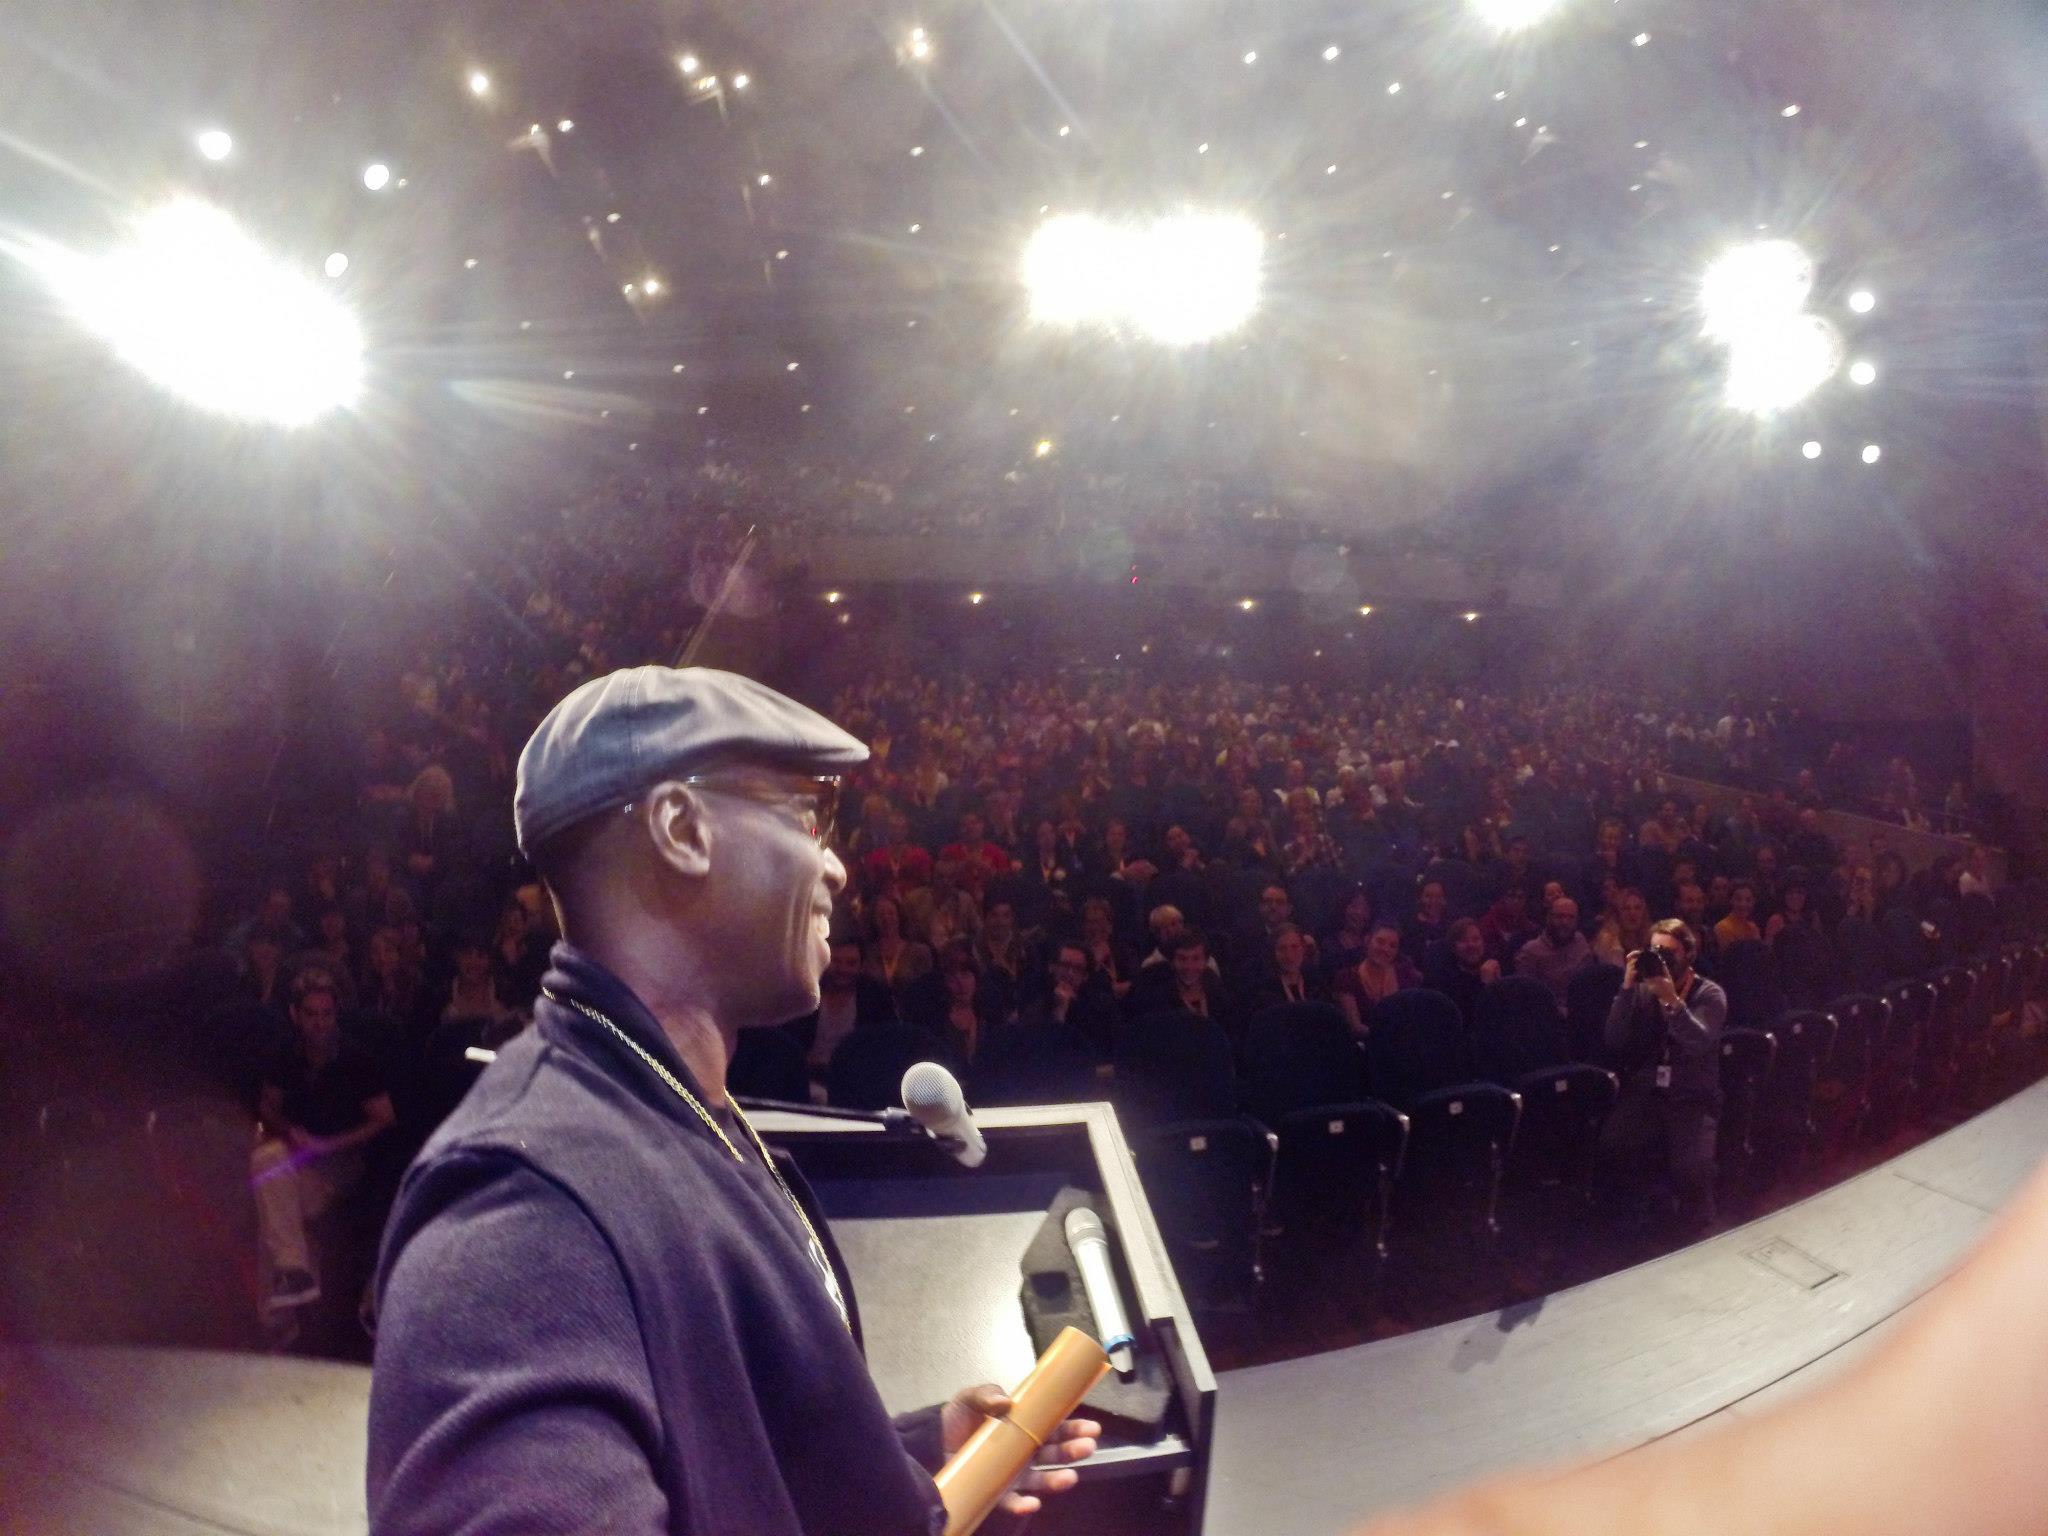 Ntare Guma Mbaho Mwine takes selfie while accepting award for his short film KUHANI at the Internationale Kurzfilmtage Winterthur in Switzerland 2014